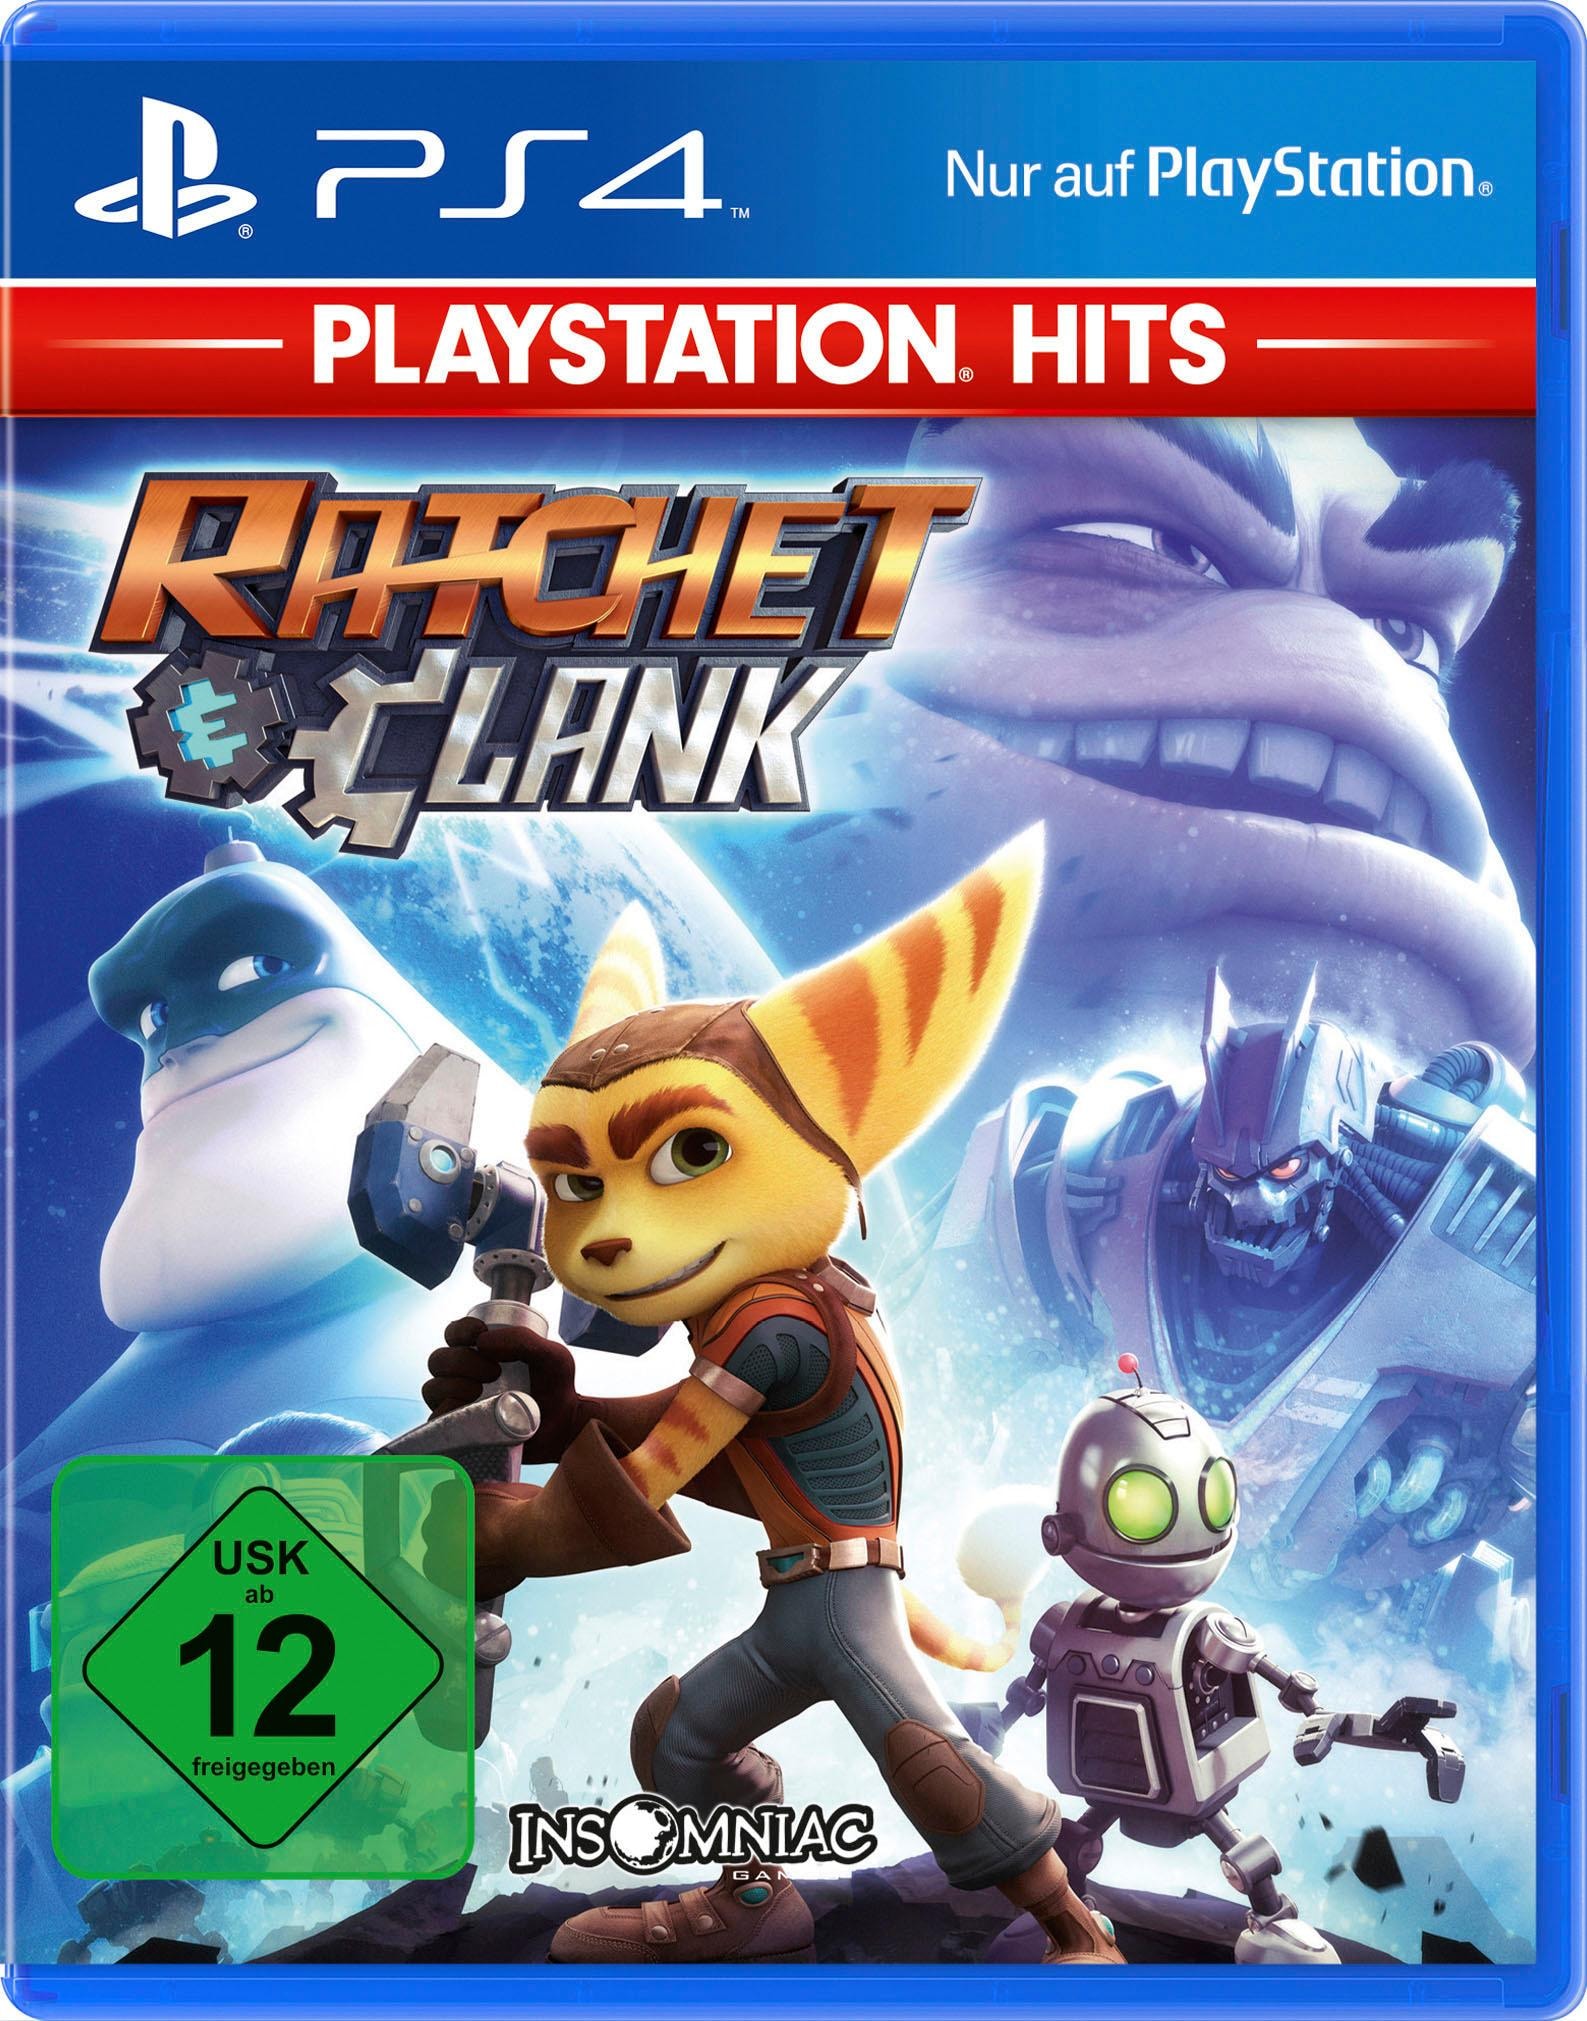 PlayStation 4 Spielesoftware »Ratchet & Clank«, PlayStation 4, Software Pyramide